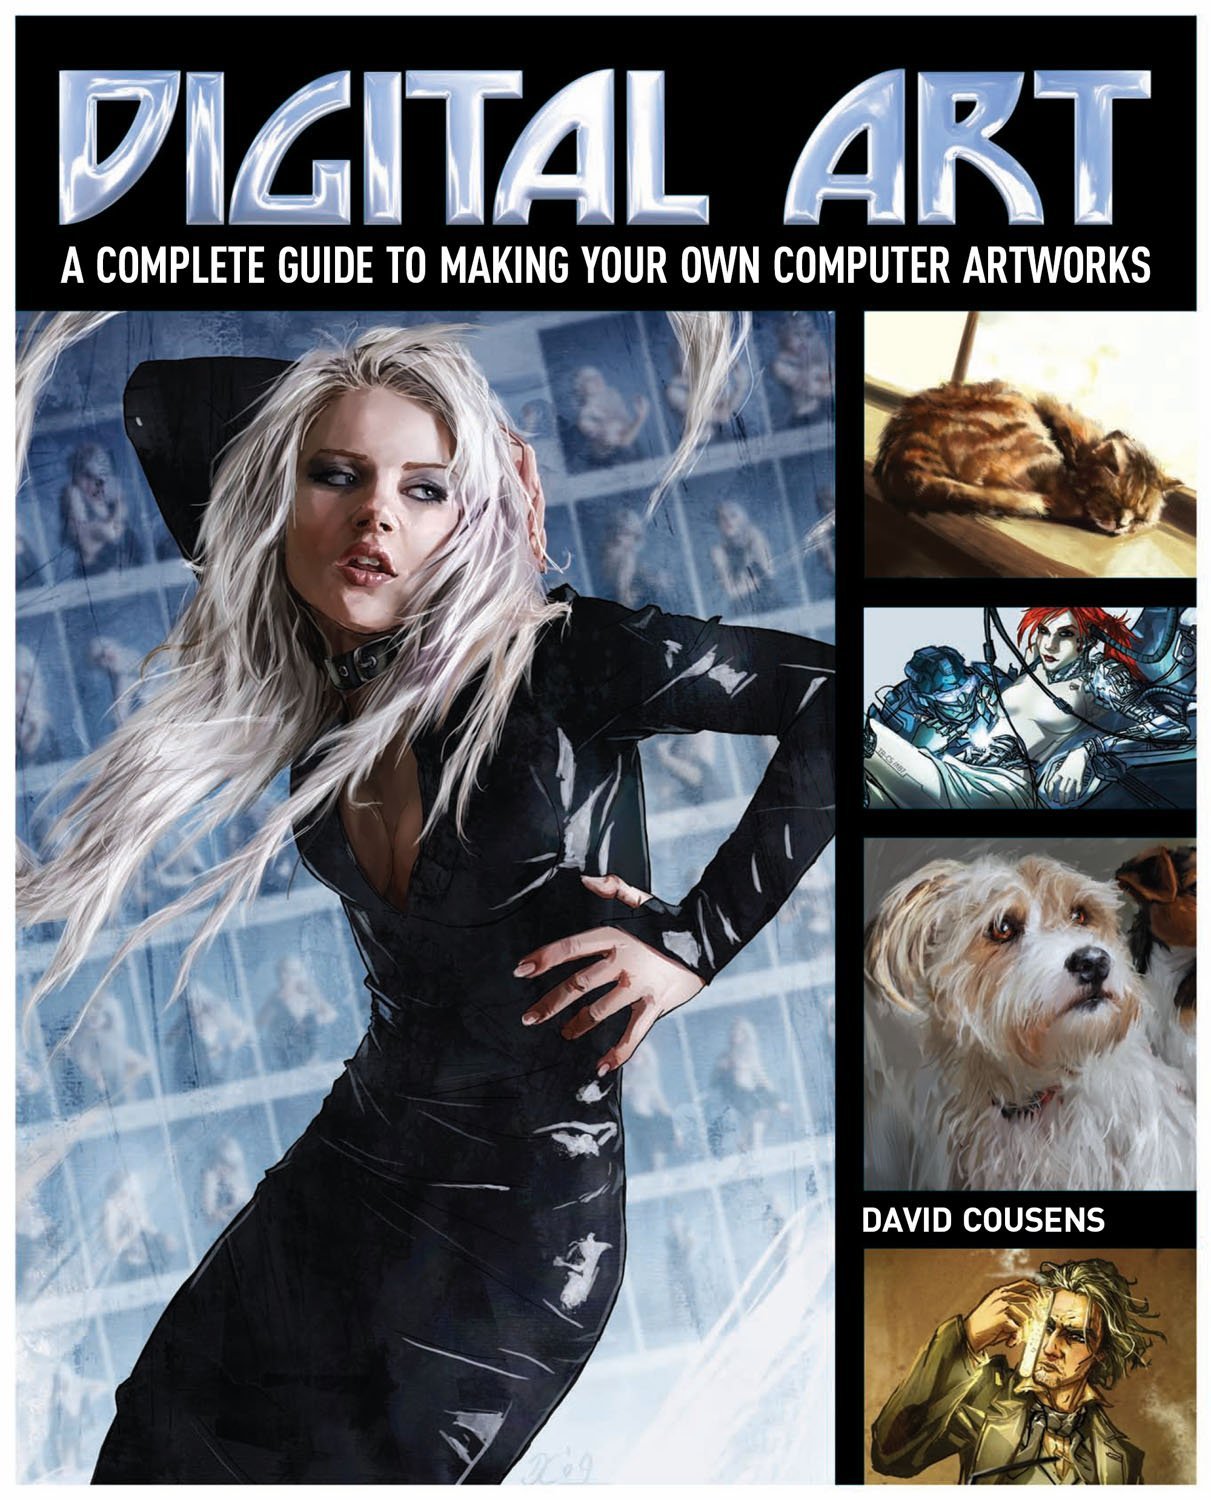 Cool Surface Lite: My new book! 'Digital Art: a complete guide to'